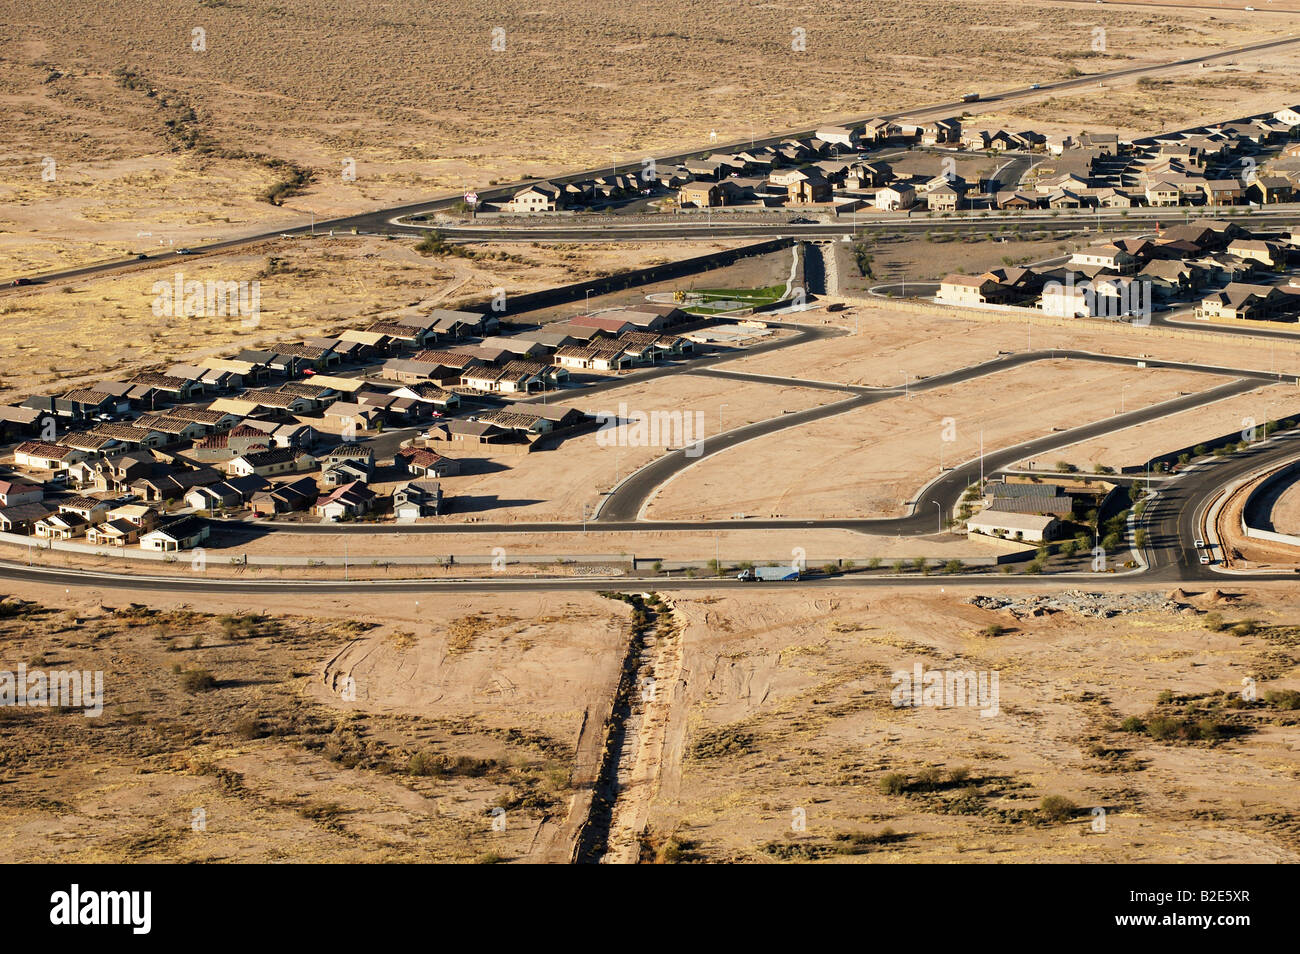 Aerial view of a new housing development on the edge of the desert in Casa Grande Arizona Stock Photo